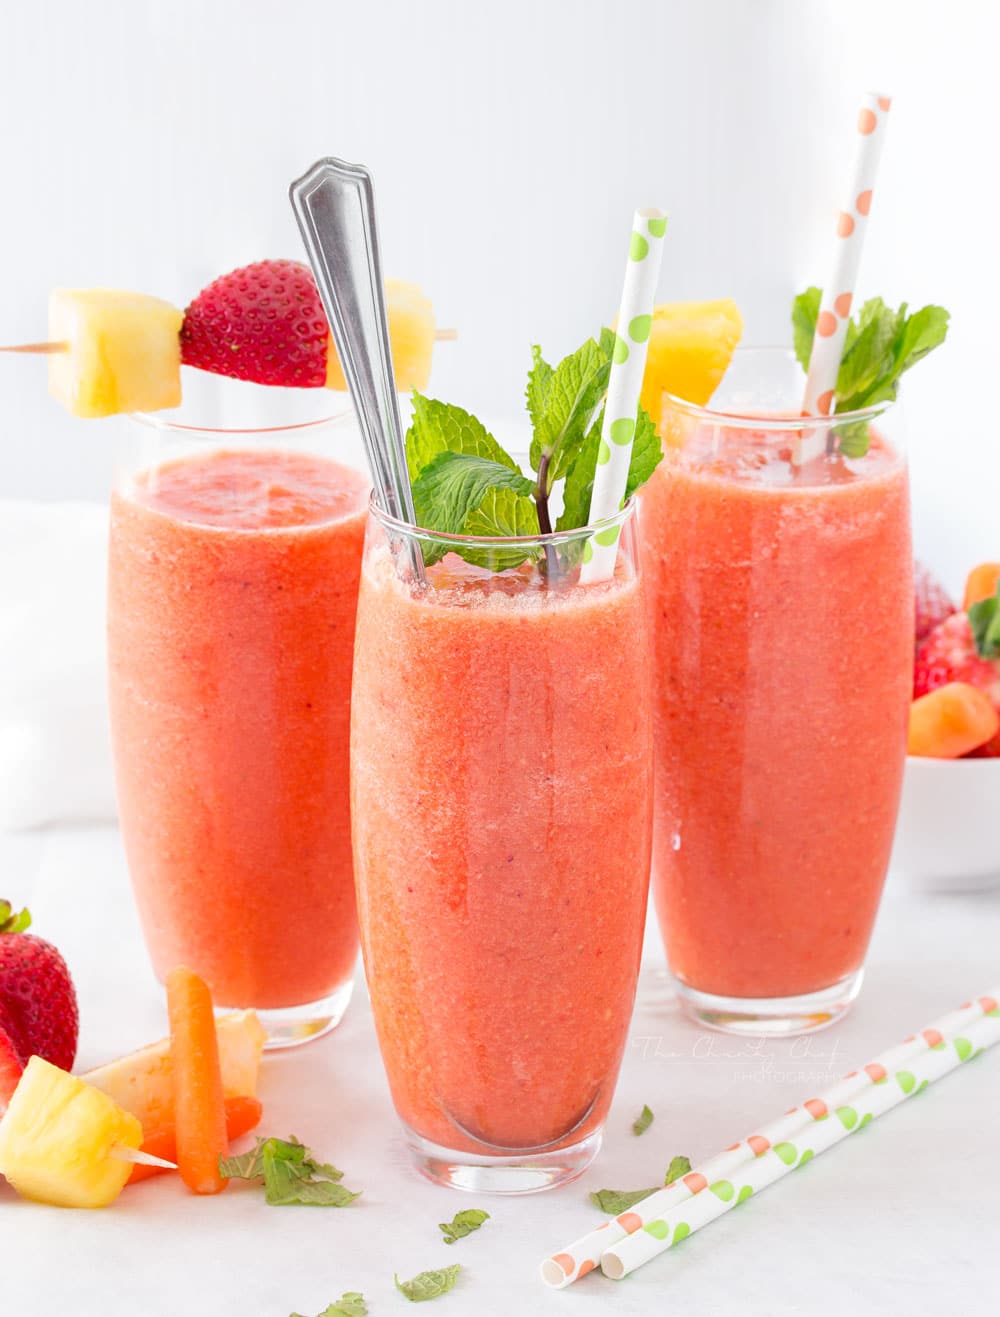 Tropical Carrot Smoothie | This simple to make carrot smoothie is bursting with tropical flavors and is so full of nutrients... healthy never tasted so good! | http://thechunkychef.com